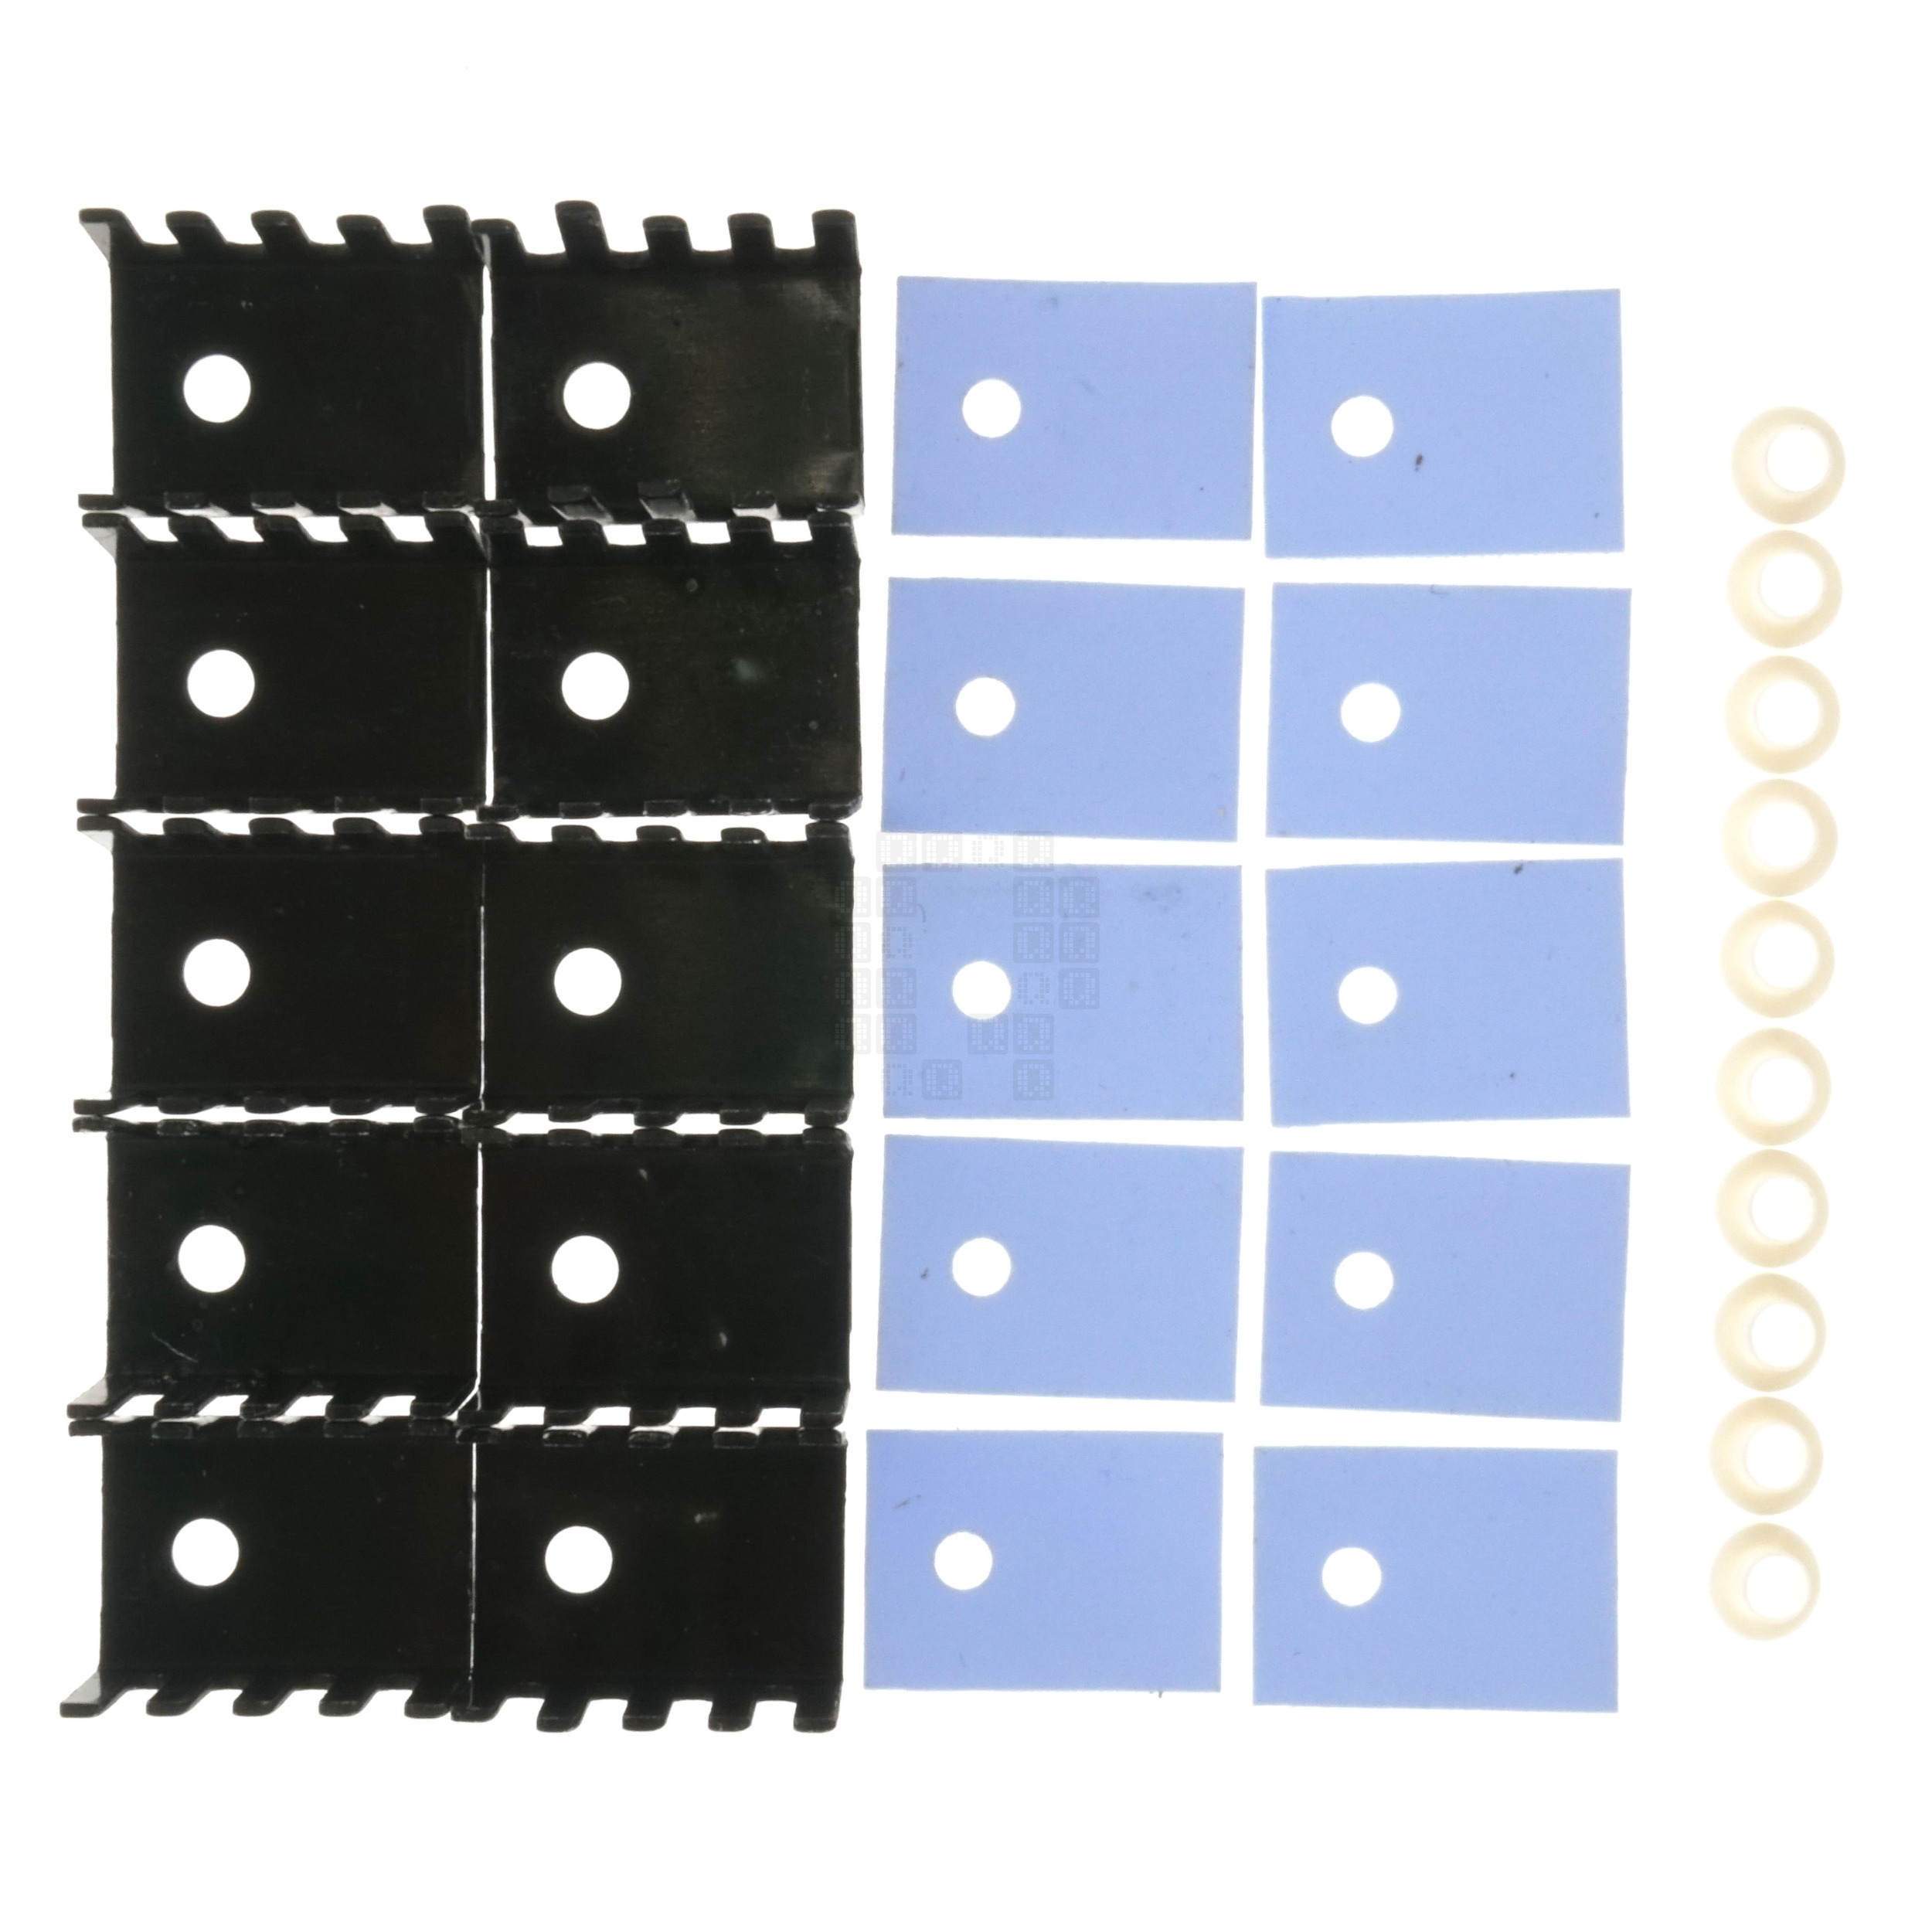 TO-220 Black Aluminum Heatsink Set with Bushings and Thermal Pads, 19x15x10mm, 10 Pack